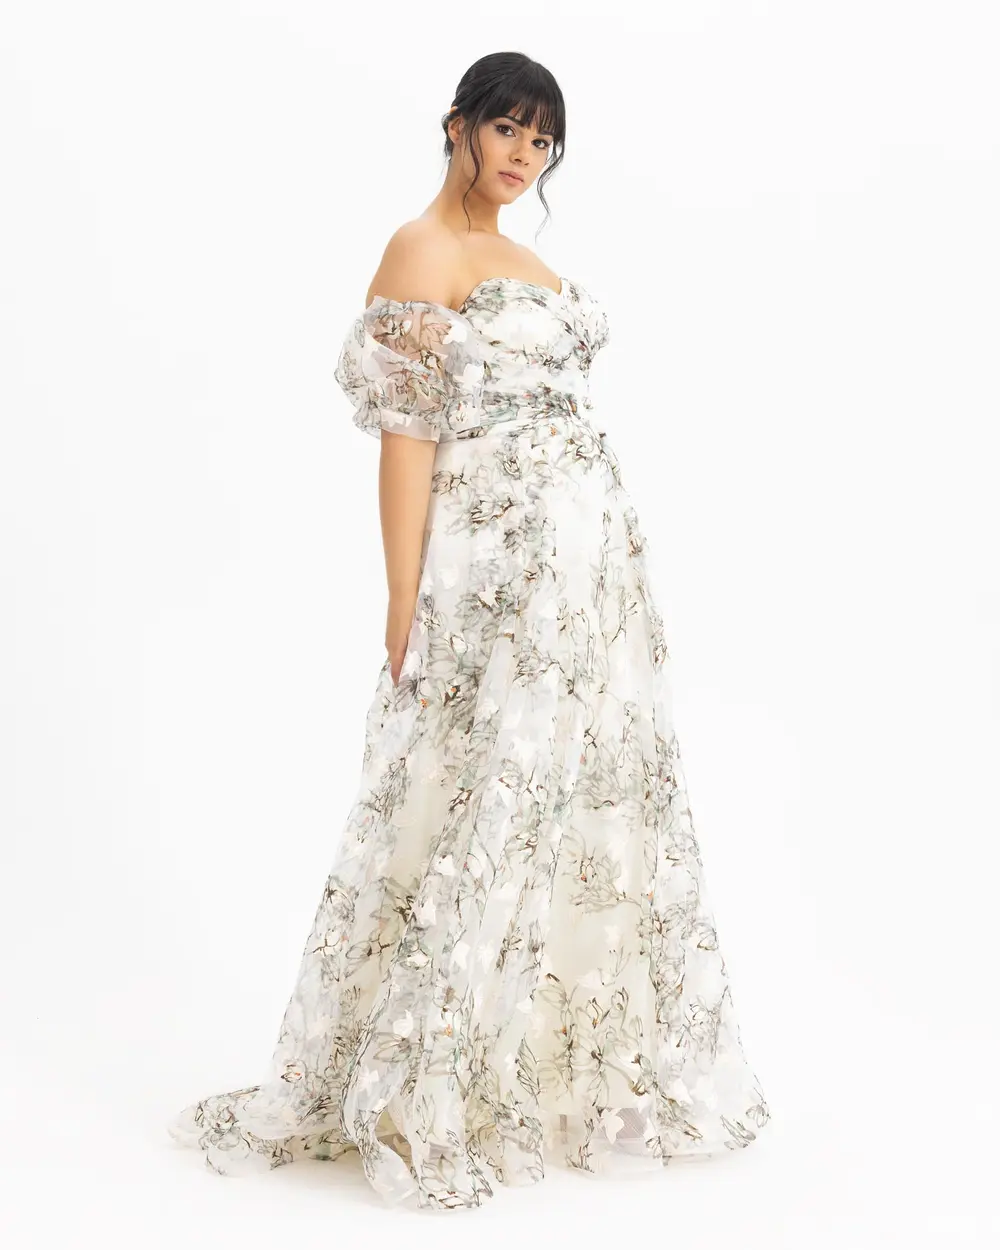  PLUS SIZE FLORAL PATTERNED BALLOON SLEEVE EVENING DRESS